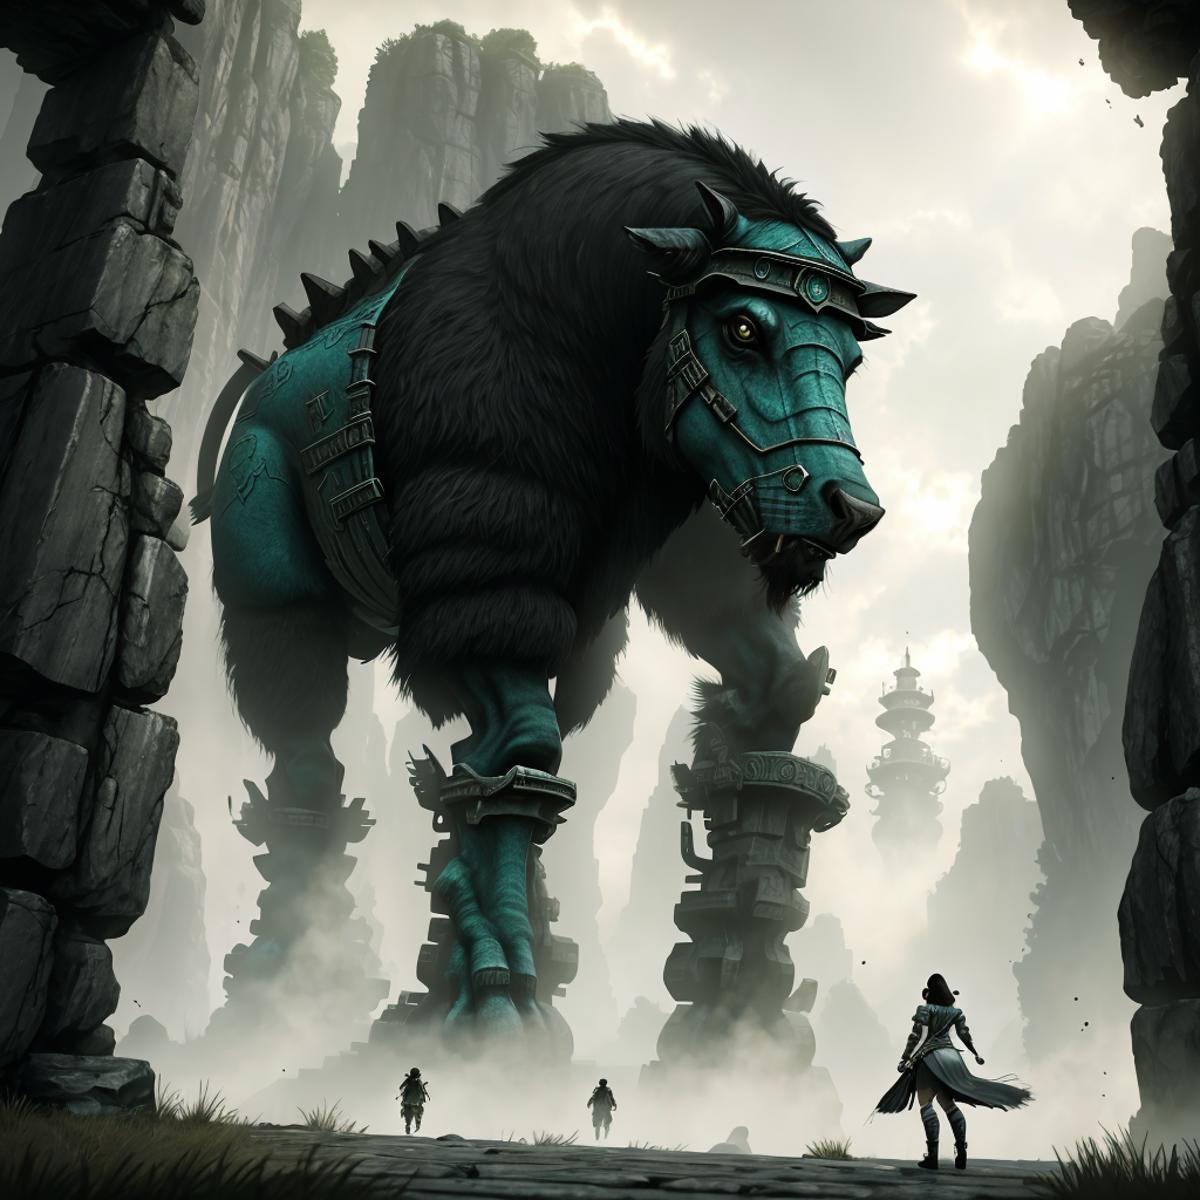 Shadow of the Colossus Aesthetics image by OldSkool